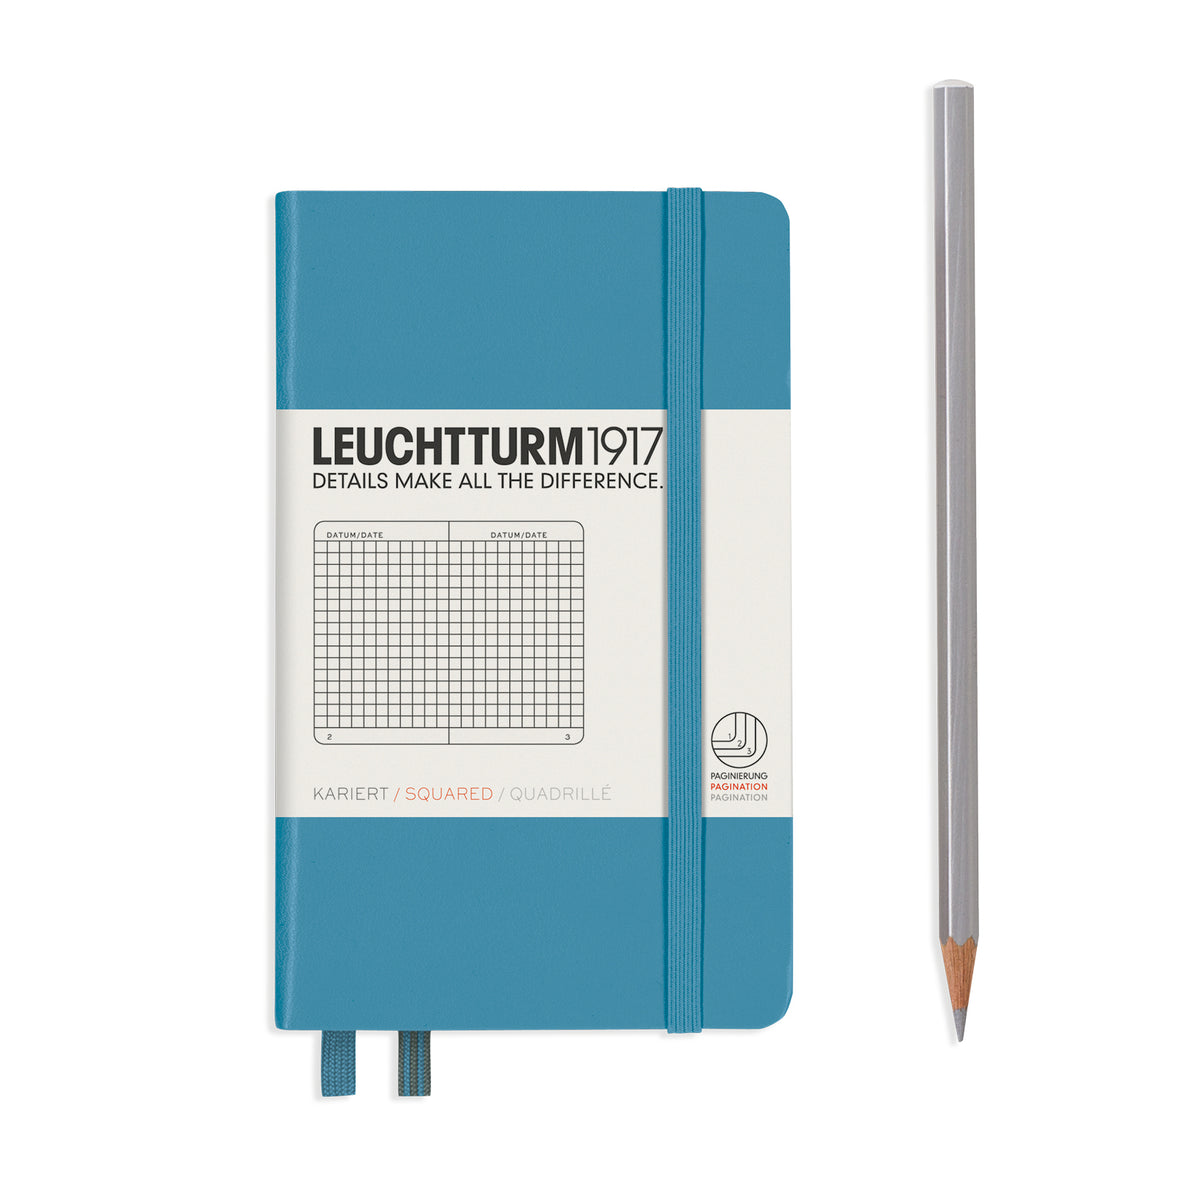 Leuchtturm1917 Notebook A6 Pocket Hardcover in nordic blue - Penny Black - squared ruling 